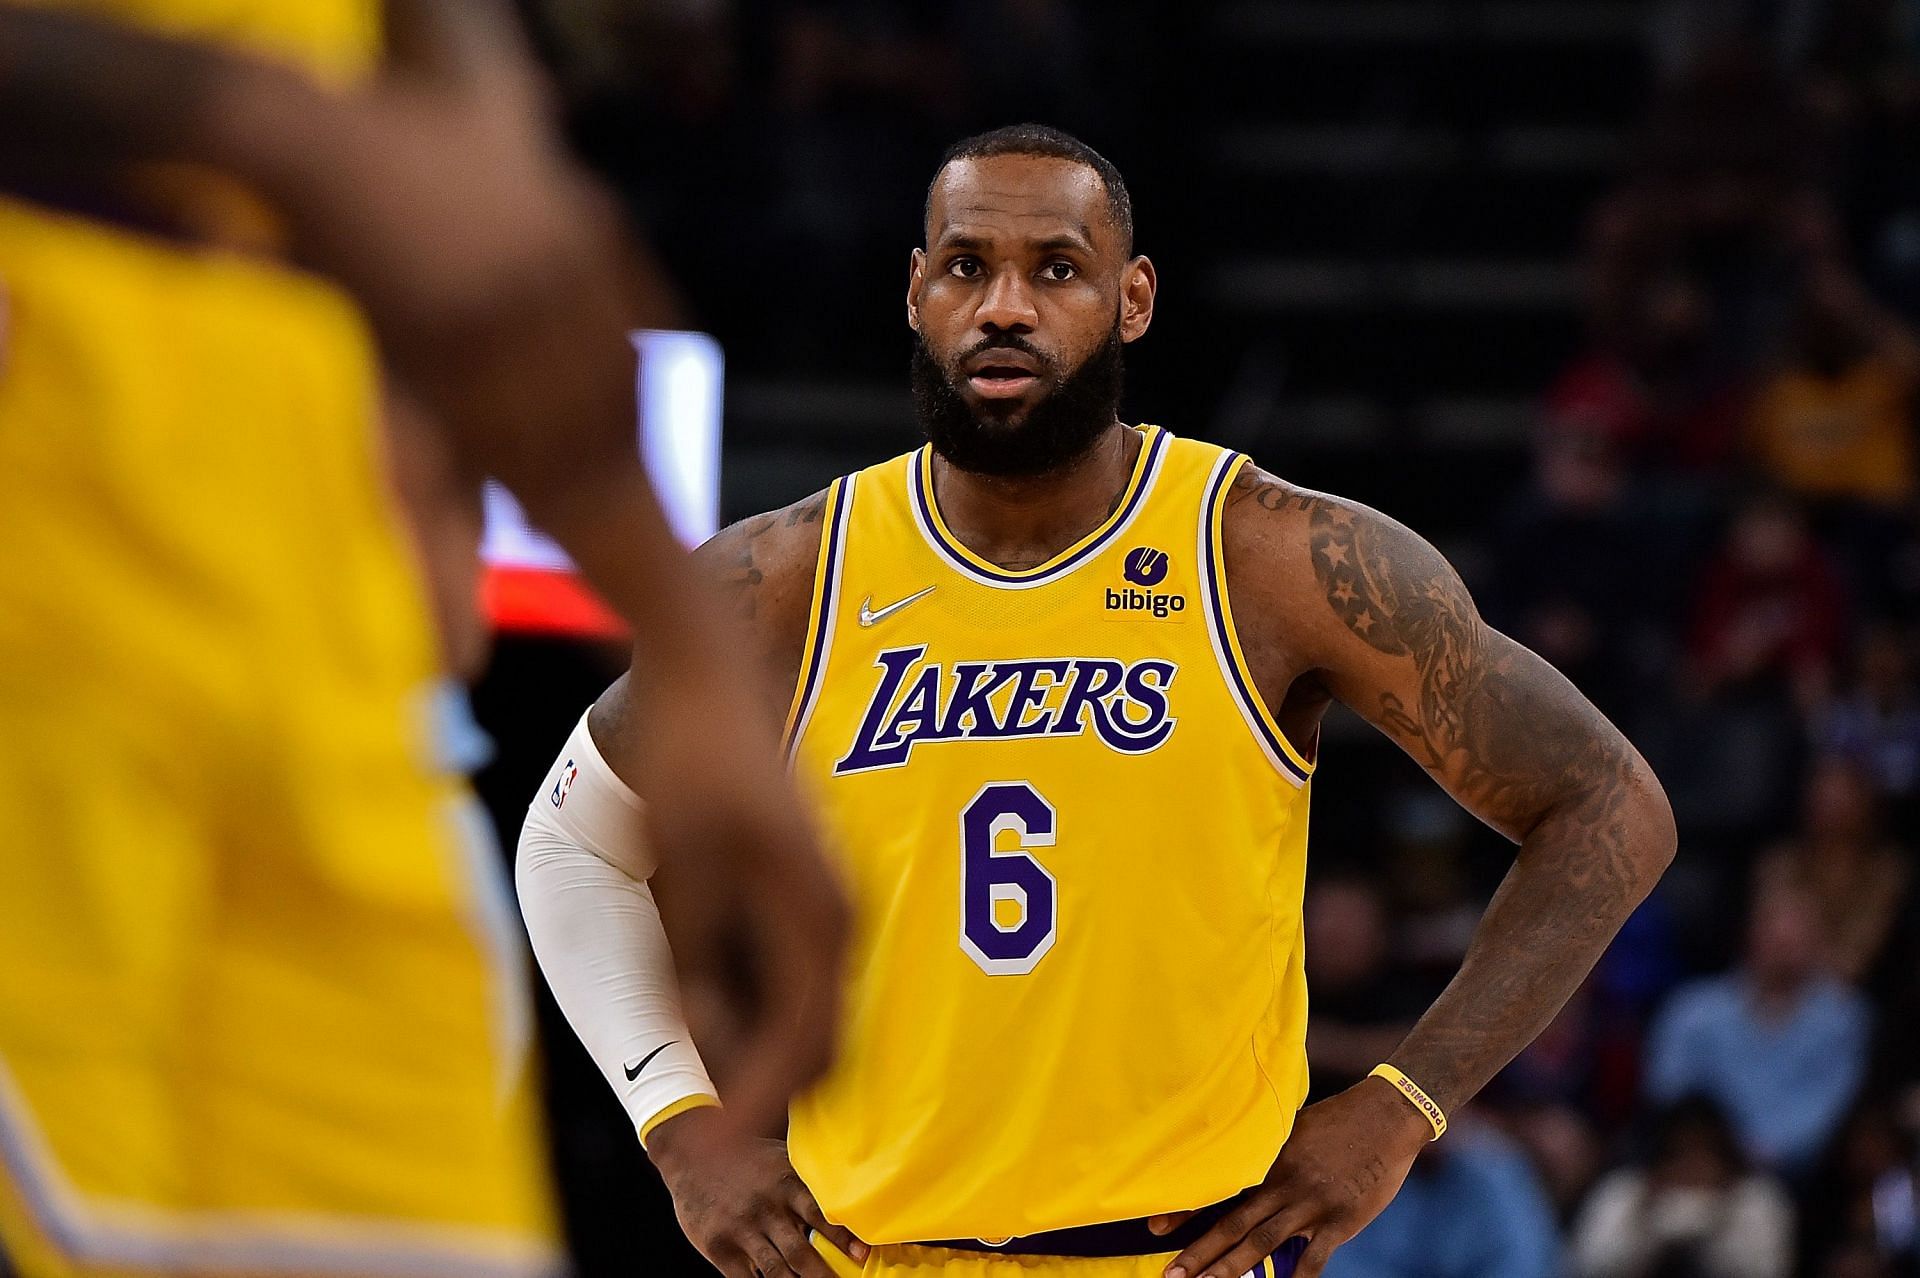 LeBron James had 37 points even as the LA Lakers lost to the Memphis Grizzlies on Wendesday